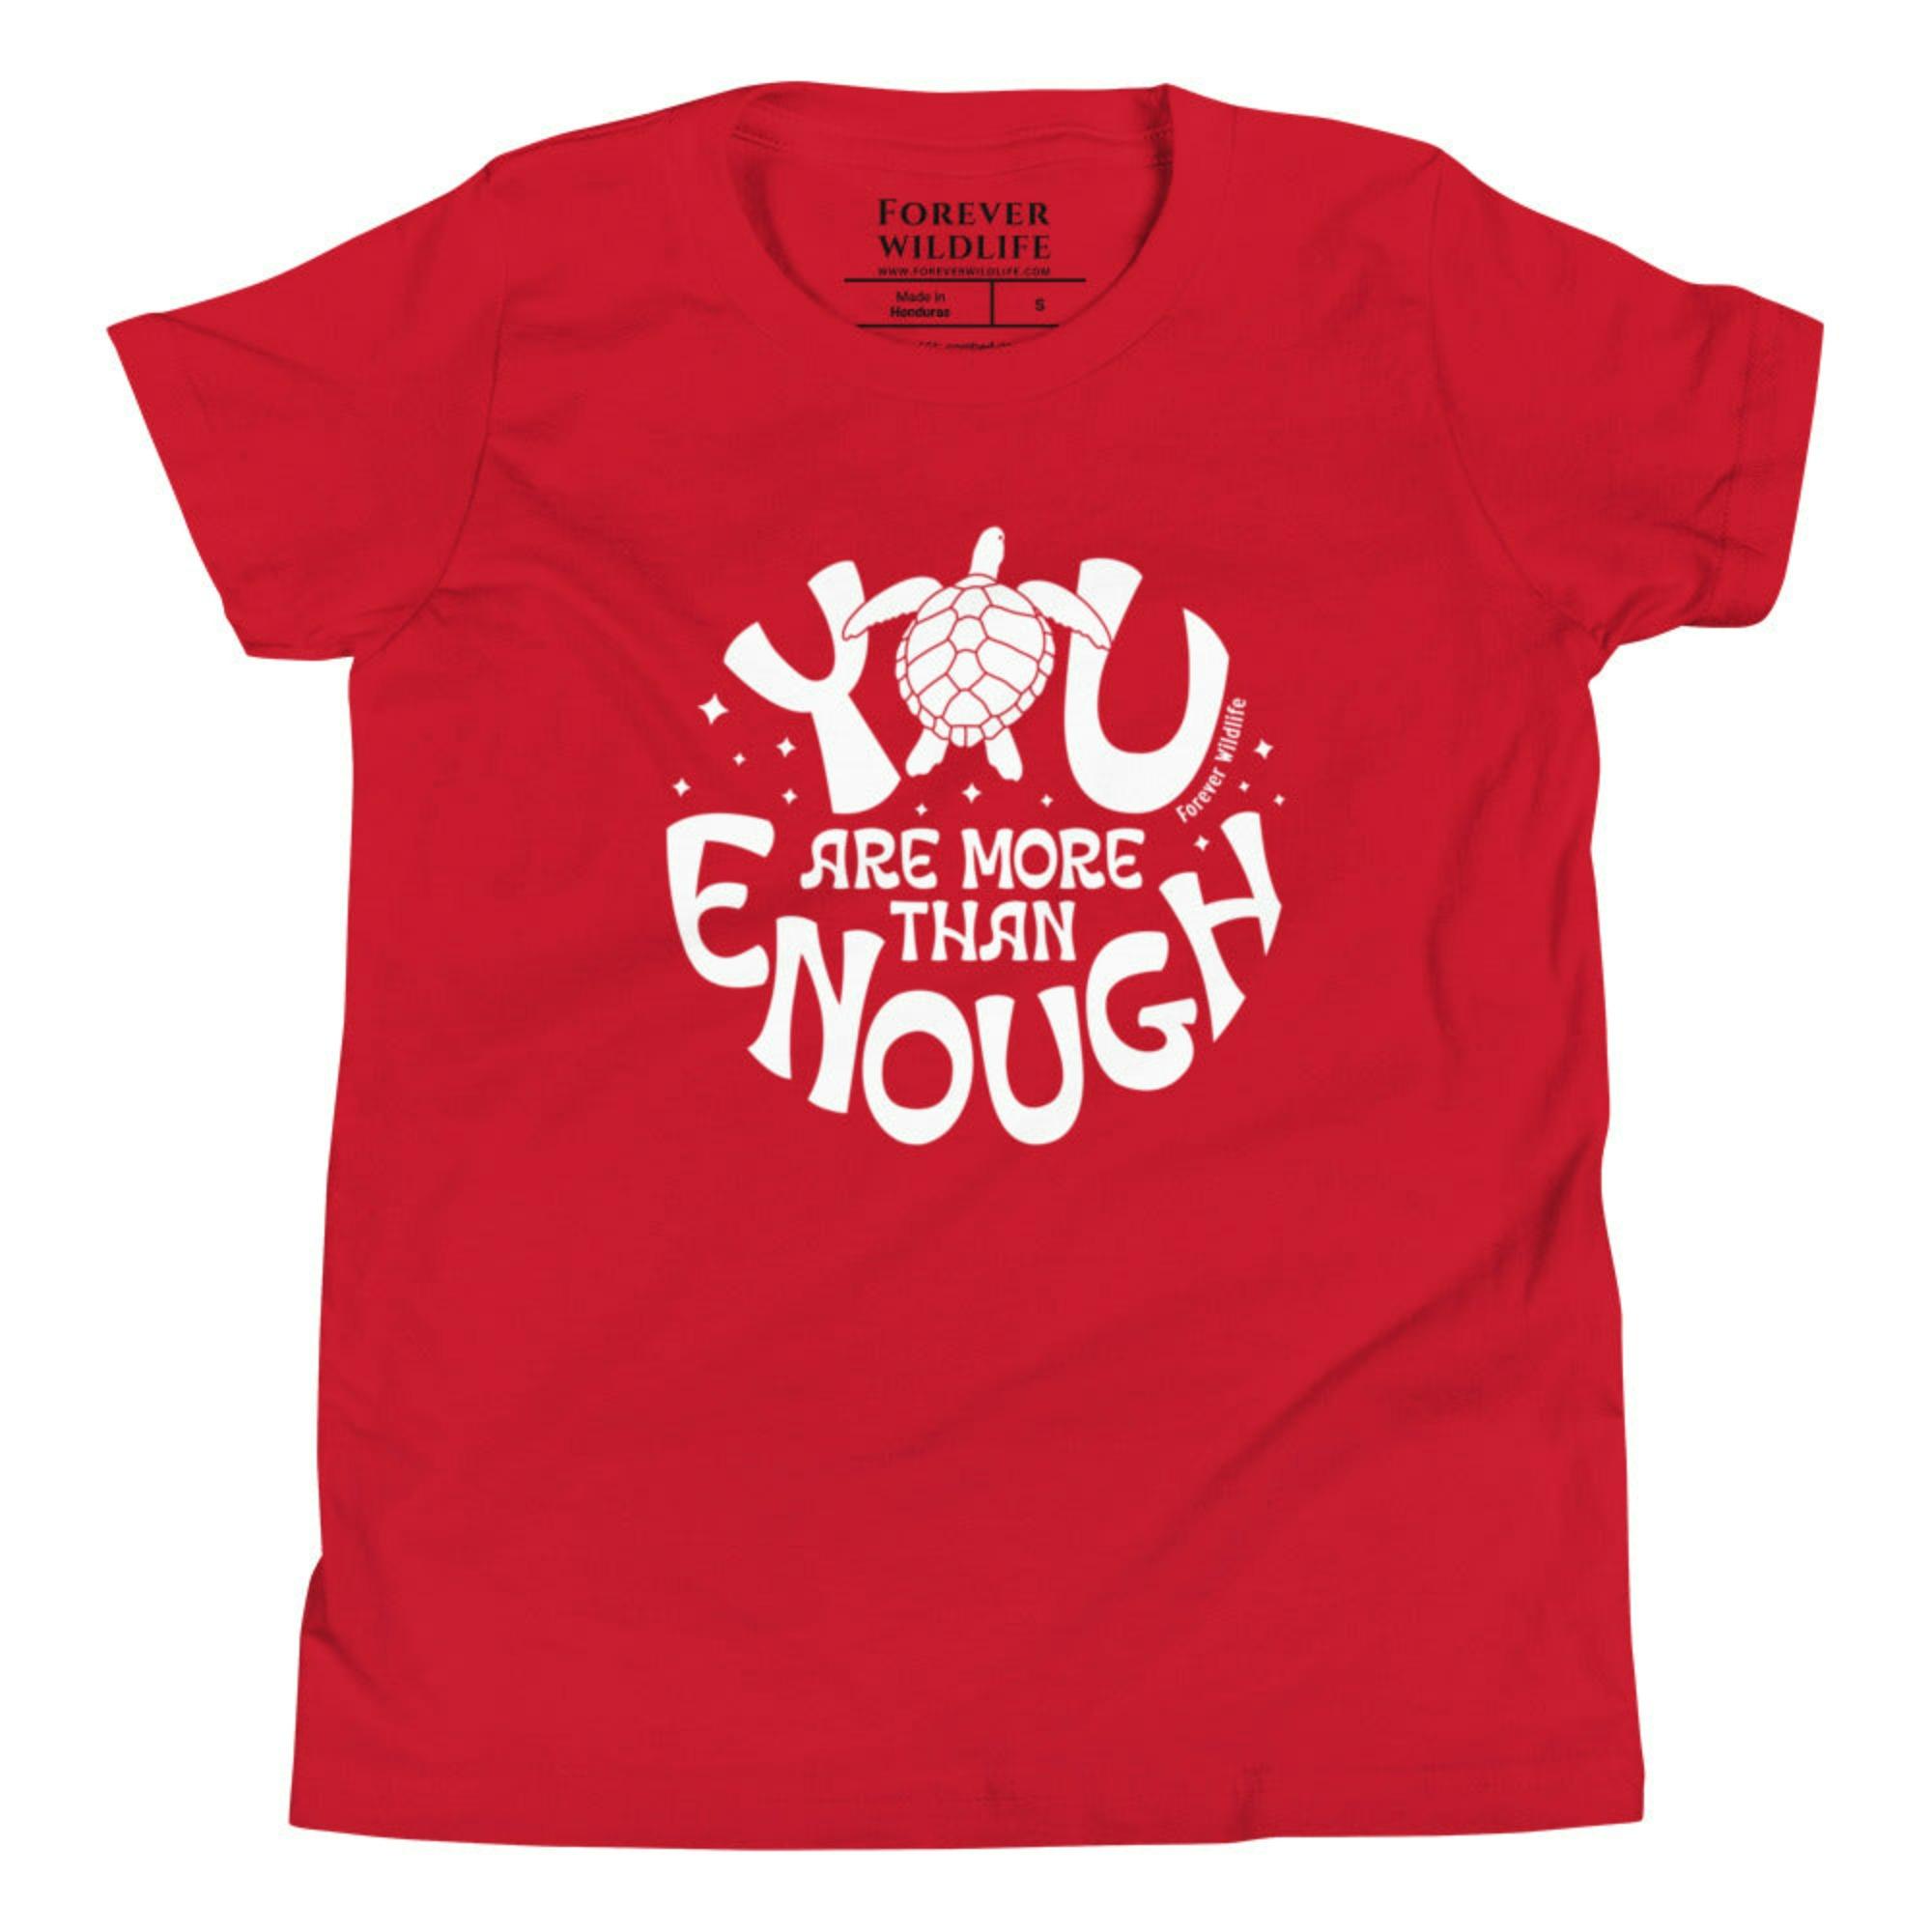 Red Youth T-Shirt with Sea Turtle graphic as part of Wildlife T-Shirts, Wildlife Clothing & Apparel by Forever Wildlife